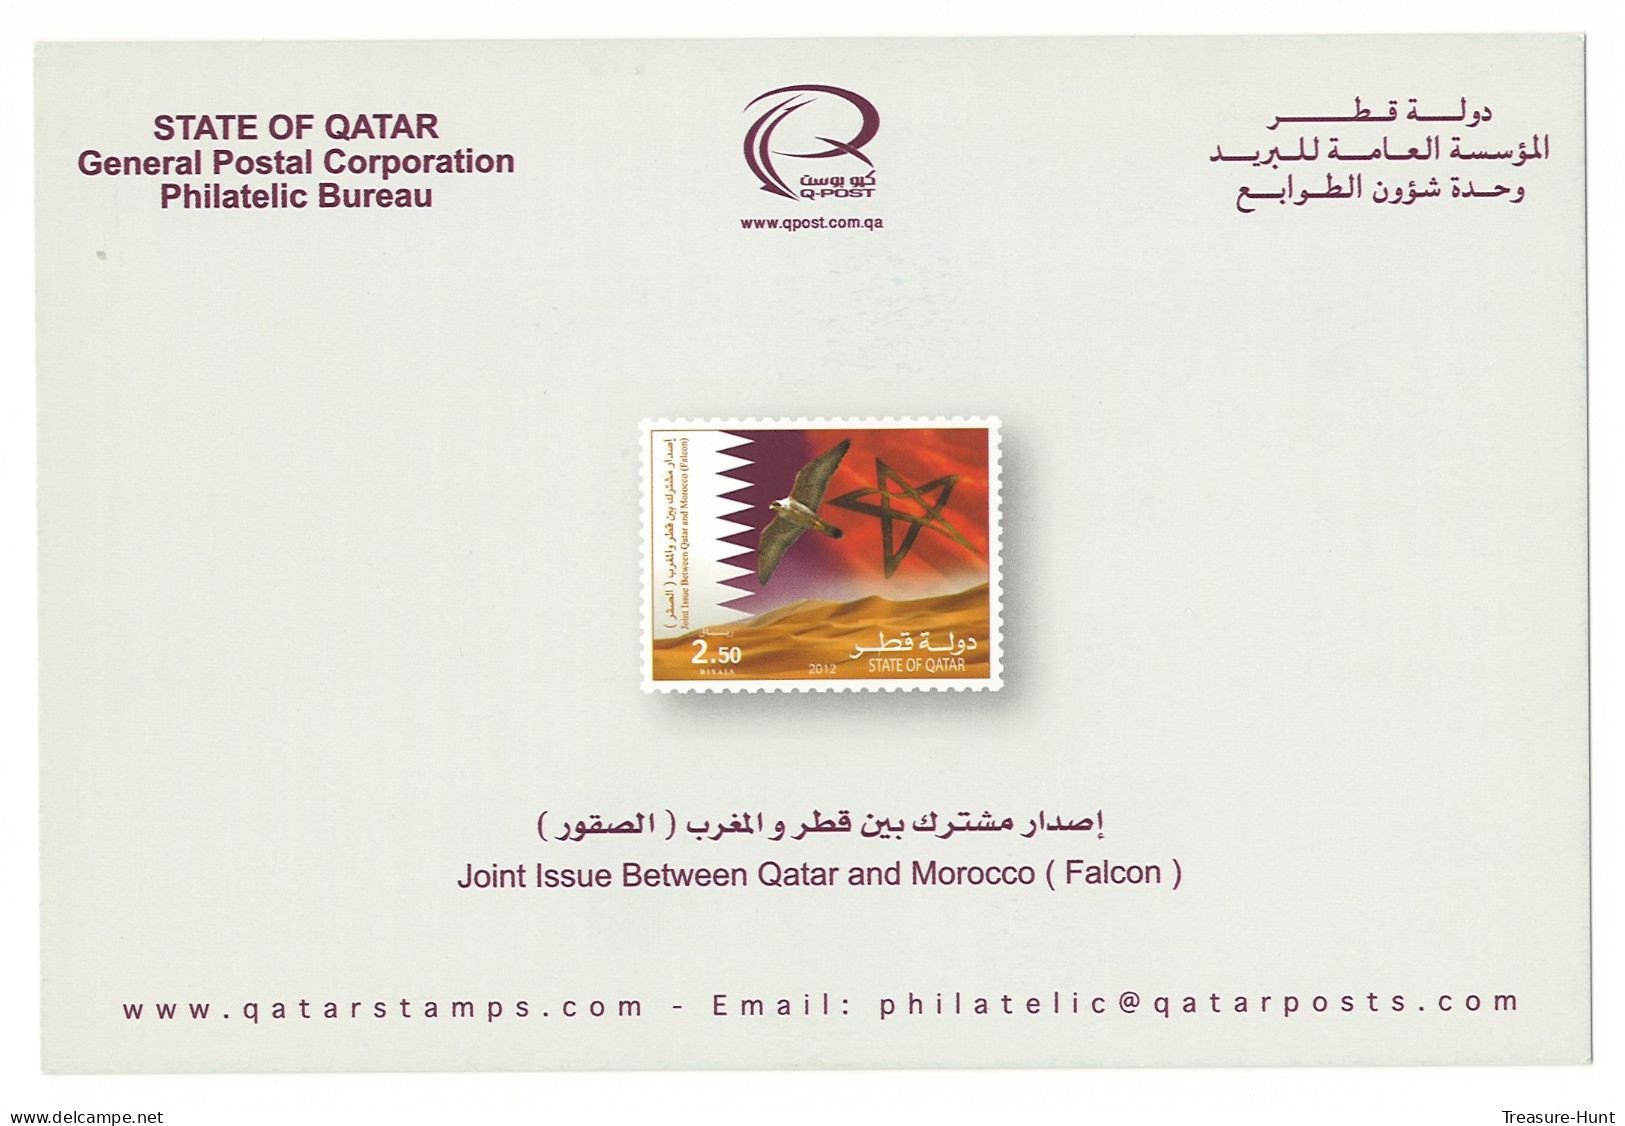 QATAR NEW STAMPS ISSUE BULLETIN / BROCHURE / POSTAL NOTICE - 2012 JOINT ISSUE WITH MOROCCO, FALCON BIRD FLAG STAR - Qatar